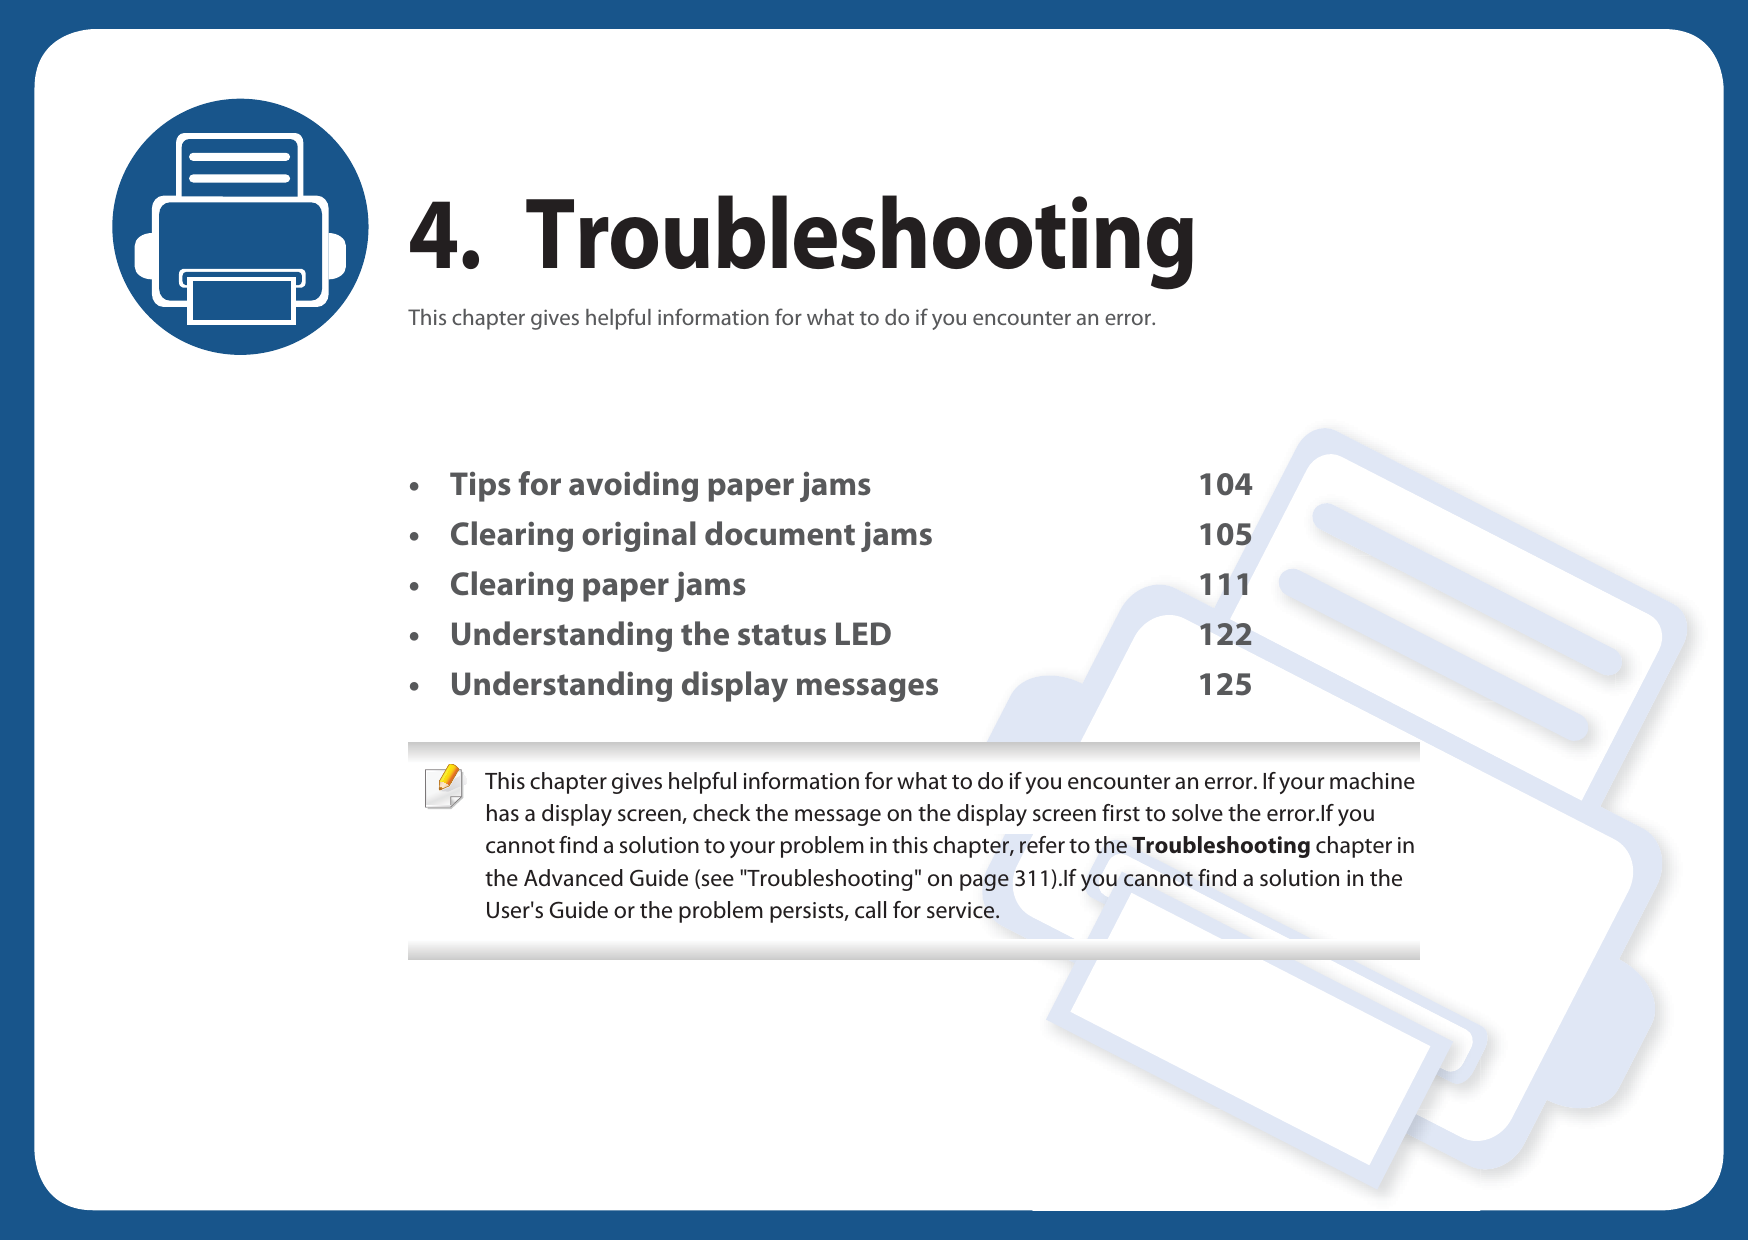 4. TroubleshootingThis chapter gives helpful information for what to do if you encounter an error.• Tips for avoiding paper jams 104• Clearing original document jams 105• Clearing paper jams 111• Understanding the status LED 122• Understanding display messages 125 This chapter gives helpful information for what to do if you encounter an error. If your machine has a display screen, check the message on the display screen first to solve the error.If you cannot find a solution to your problem in this chapter, refer to the Troubleshooting chapter in the Advanced Guide (see &quot;Troubleshooting&quot; on page 311).If you cannot find a solution in the User&apos;s Guide or the problem persists, call for service.  